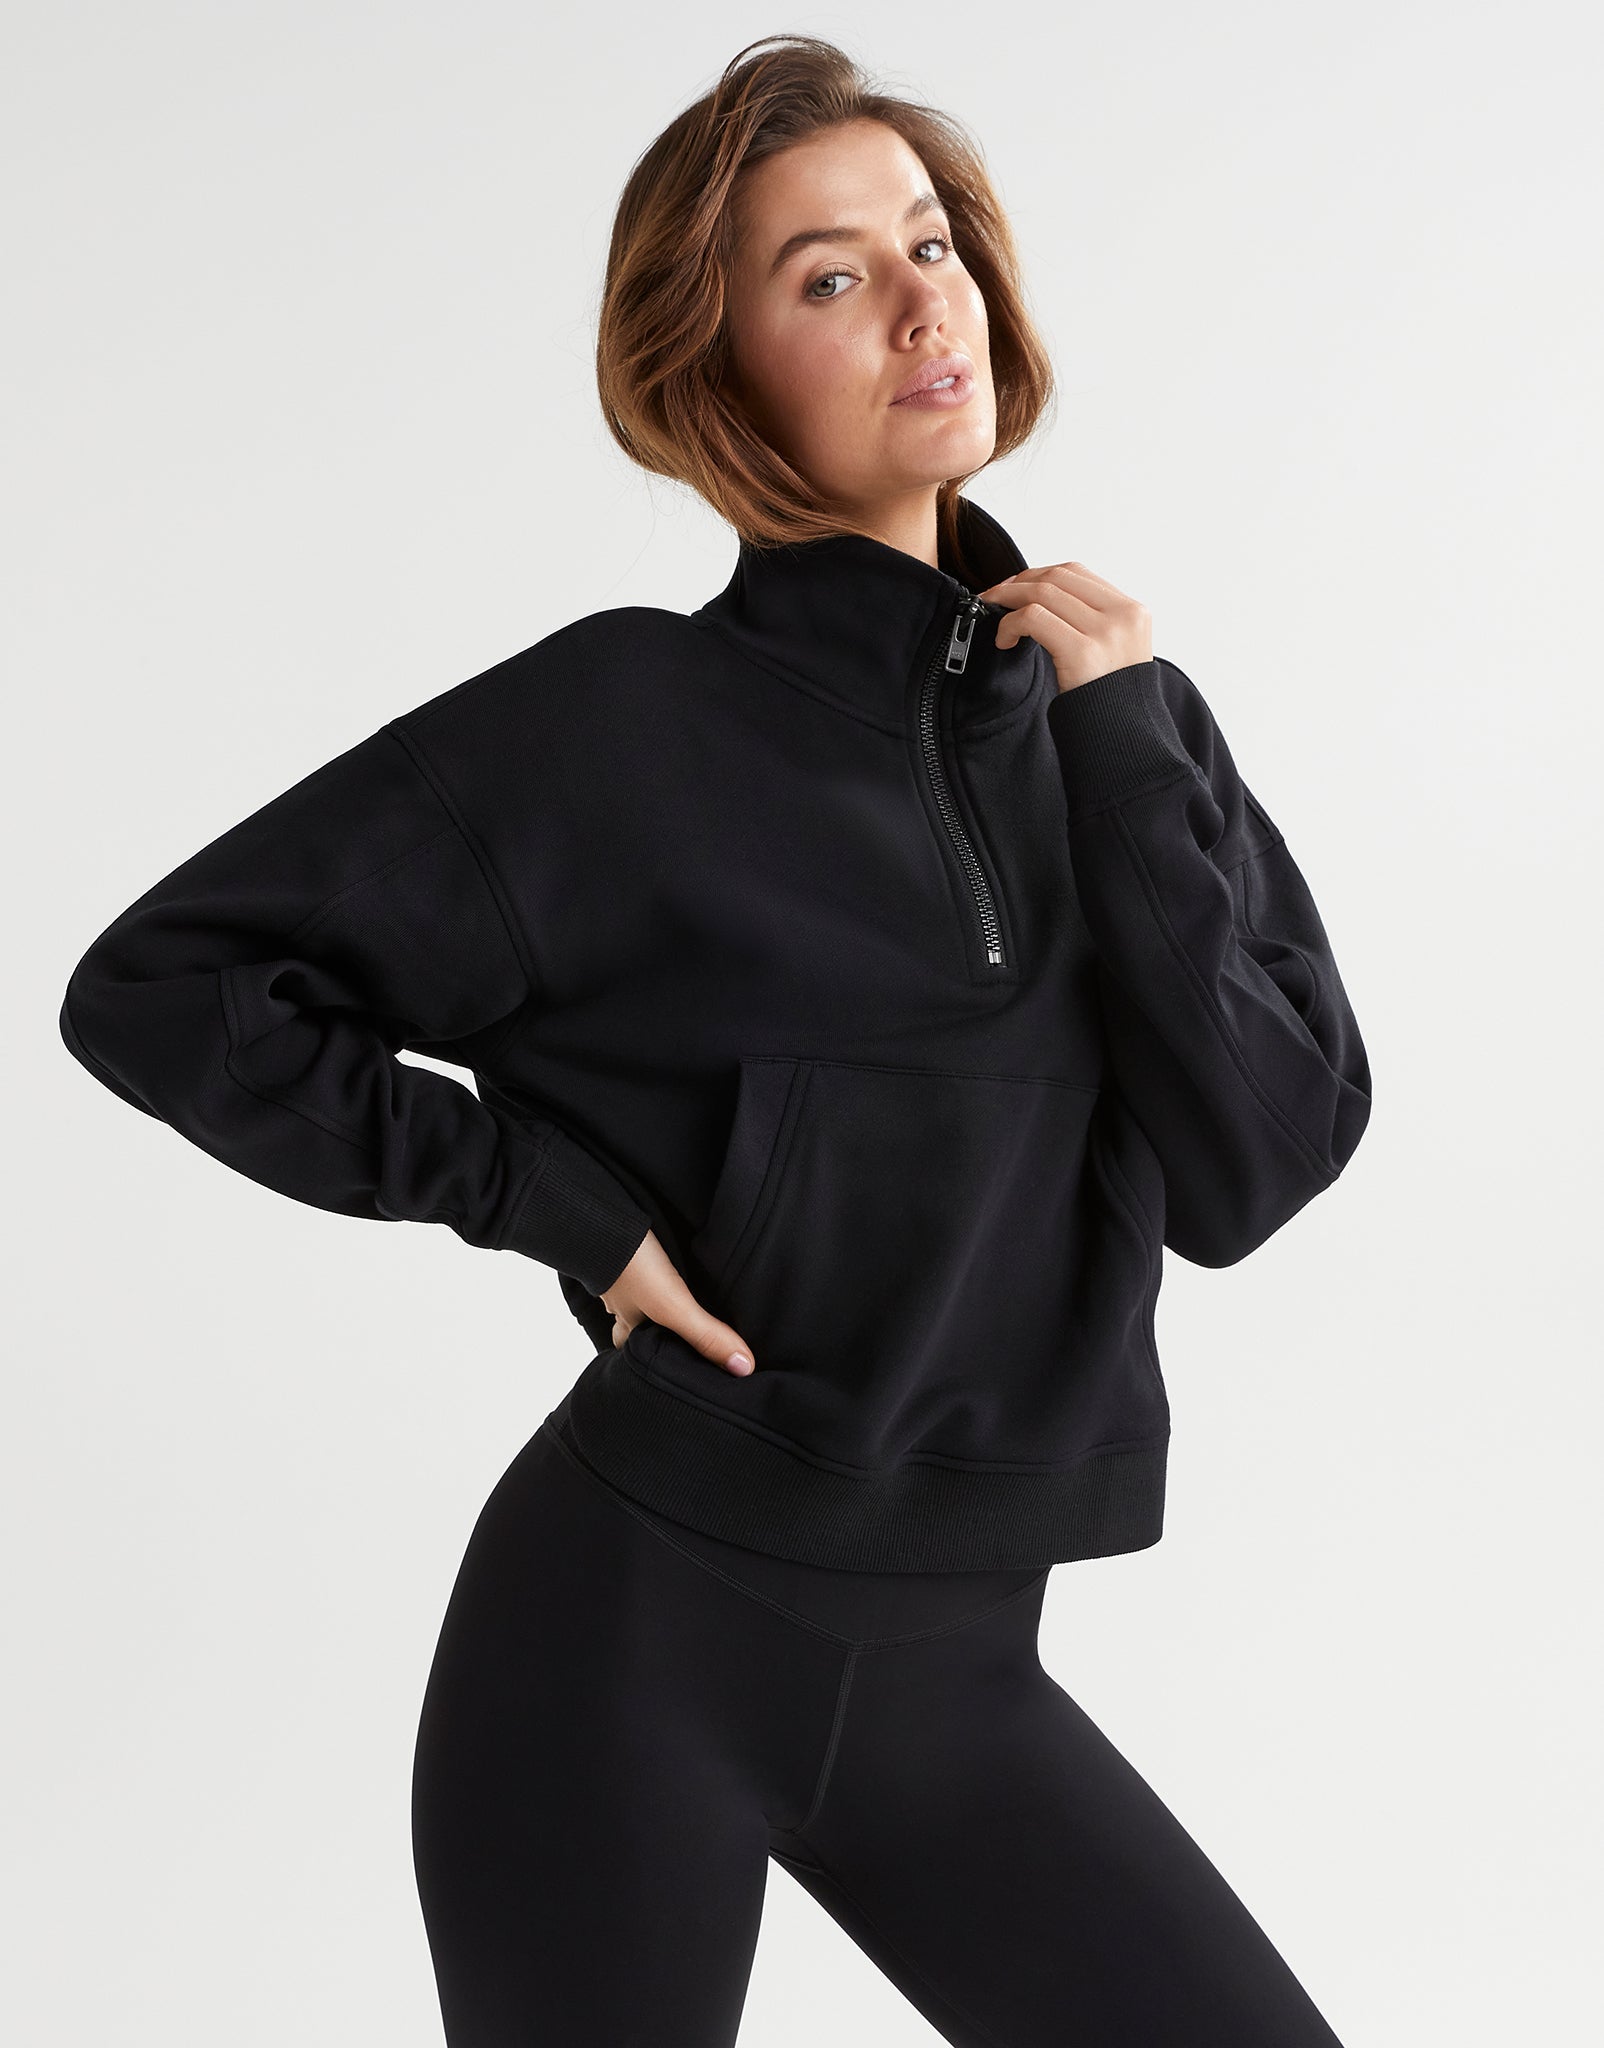 New @lilybod Chloe jackets. in stock and perfect for right now